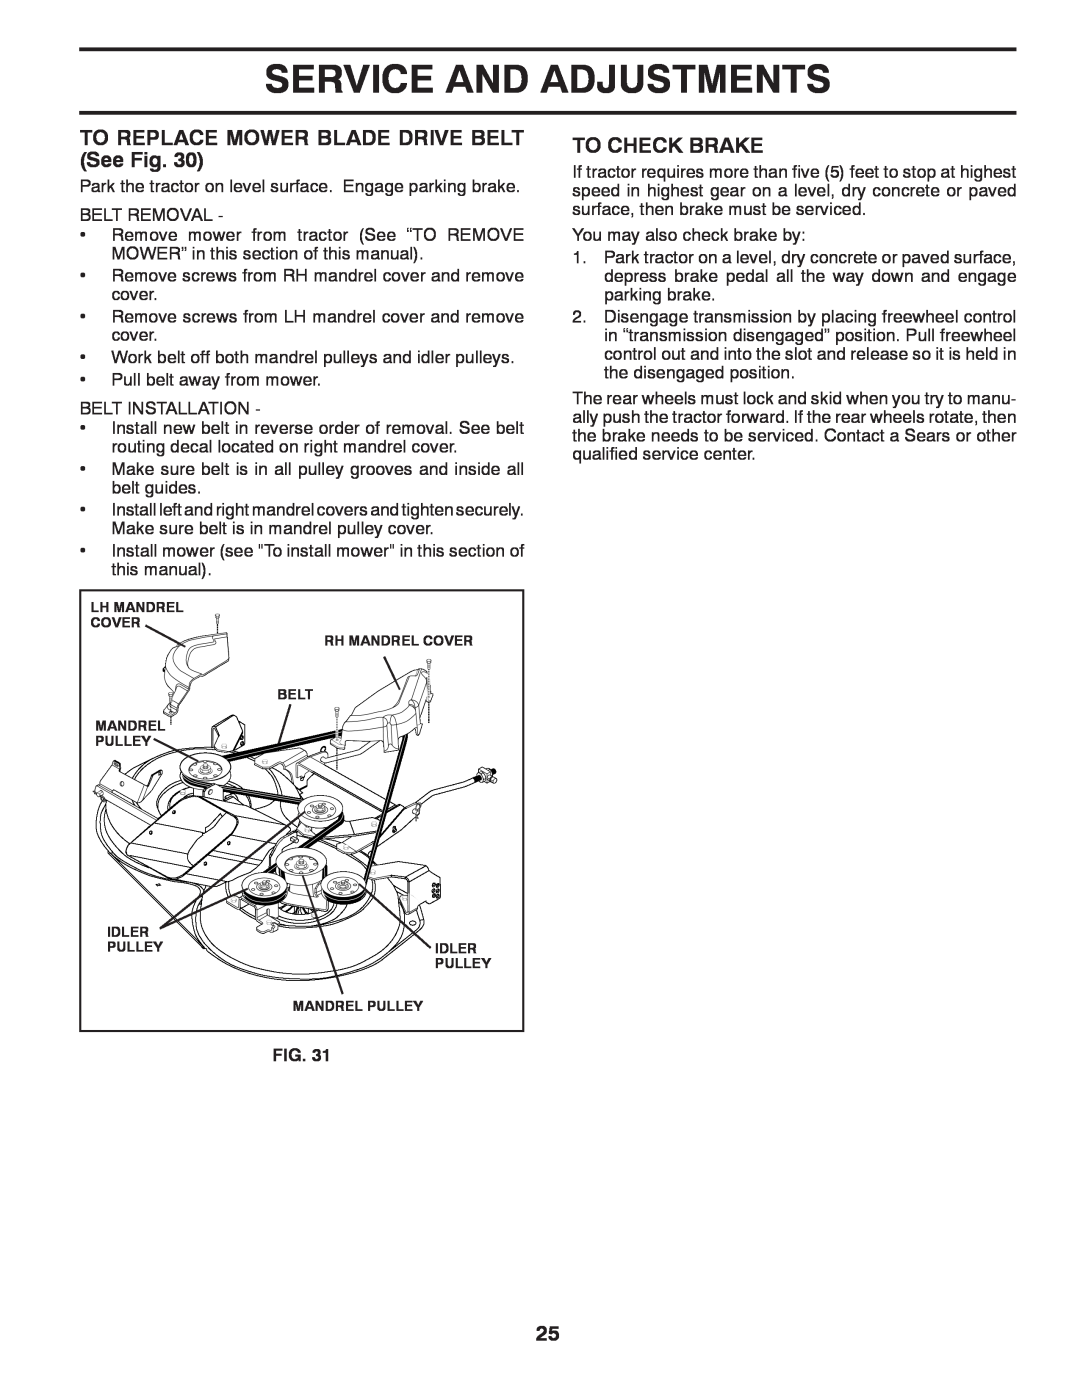 Husqvarna CTH2036 TWIN owner manual TO REPLACE MOWER BLADE DRIVE BELT See Fig, To Check Brake, Service And Adjustments 